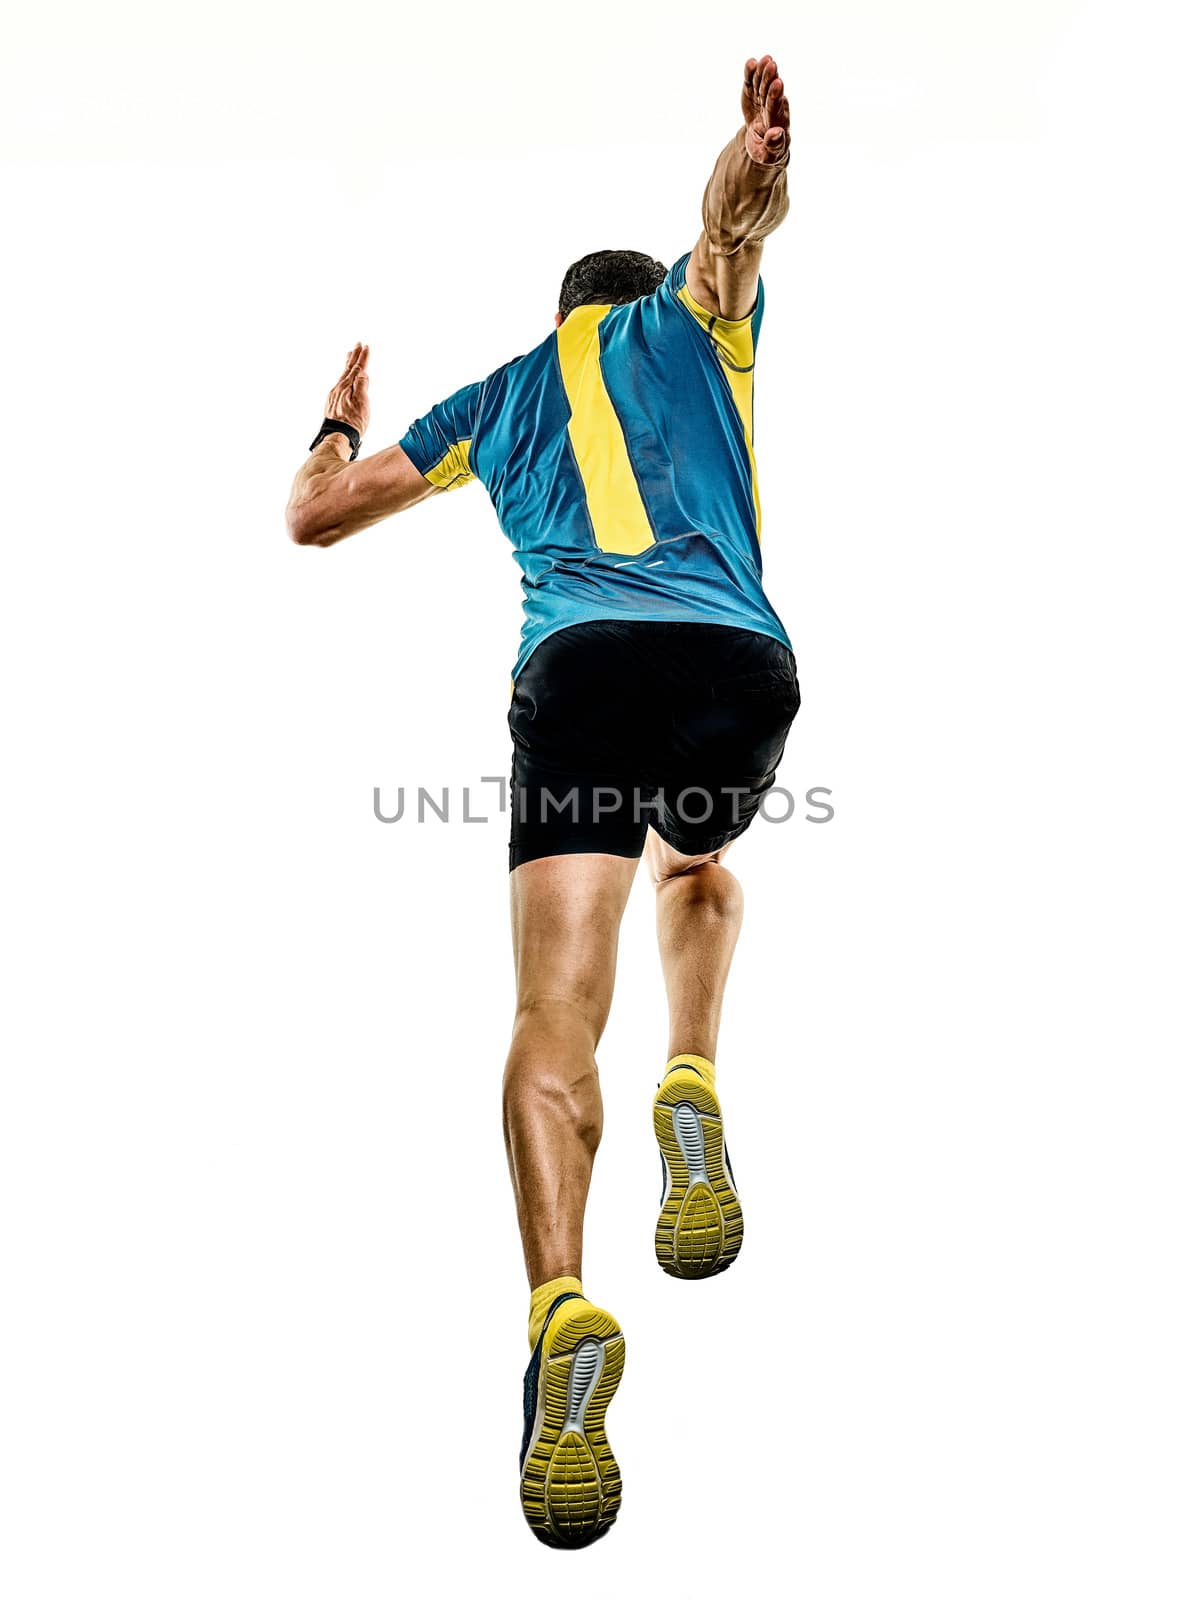 one caucasian handsome mature man running runner jogging jogger isolated on white background